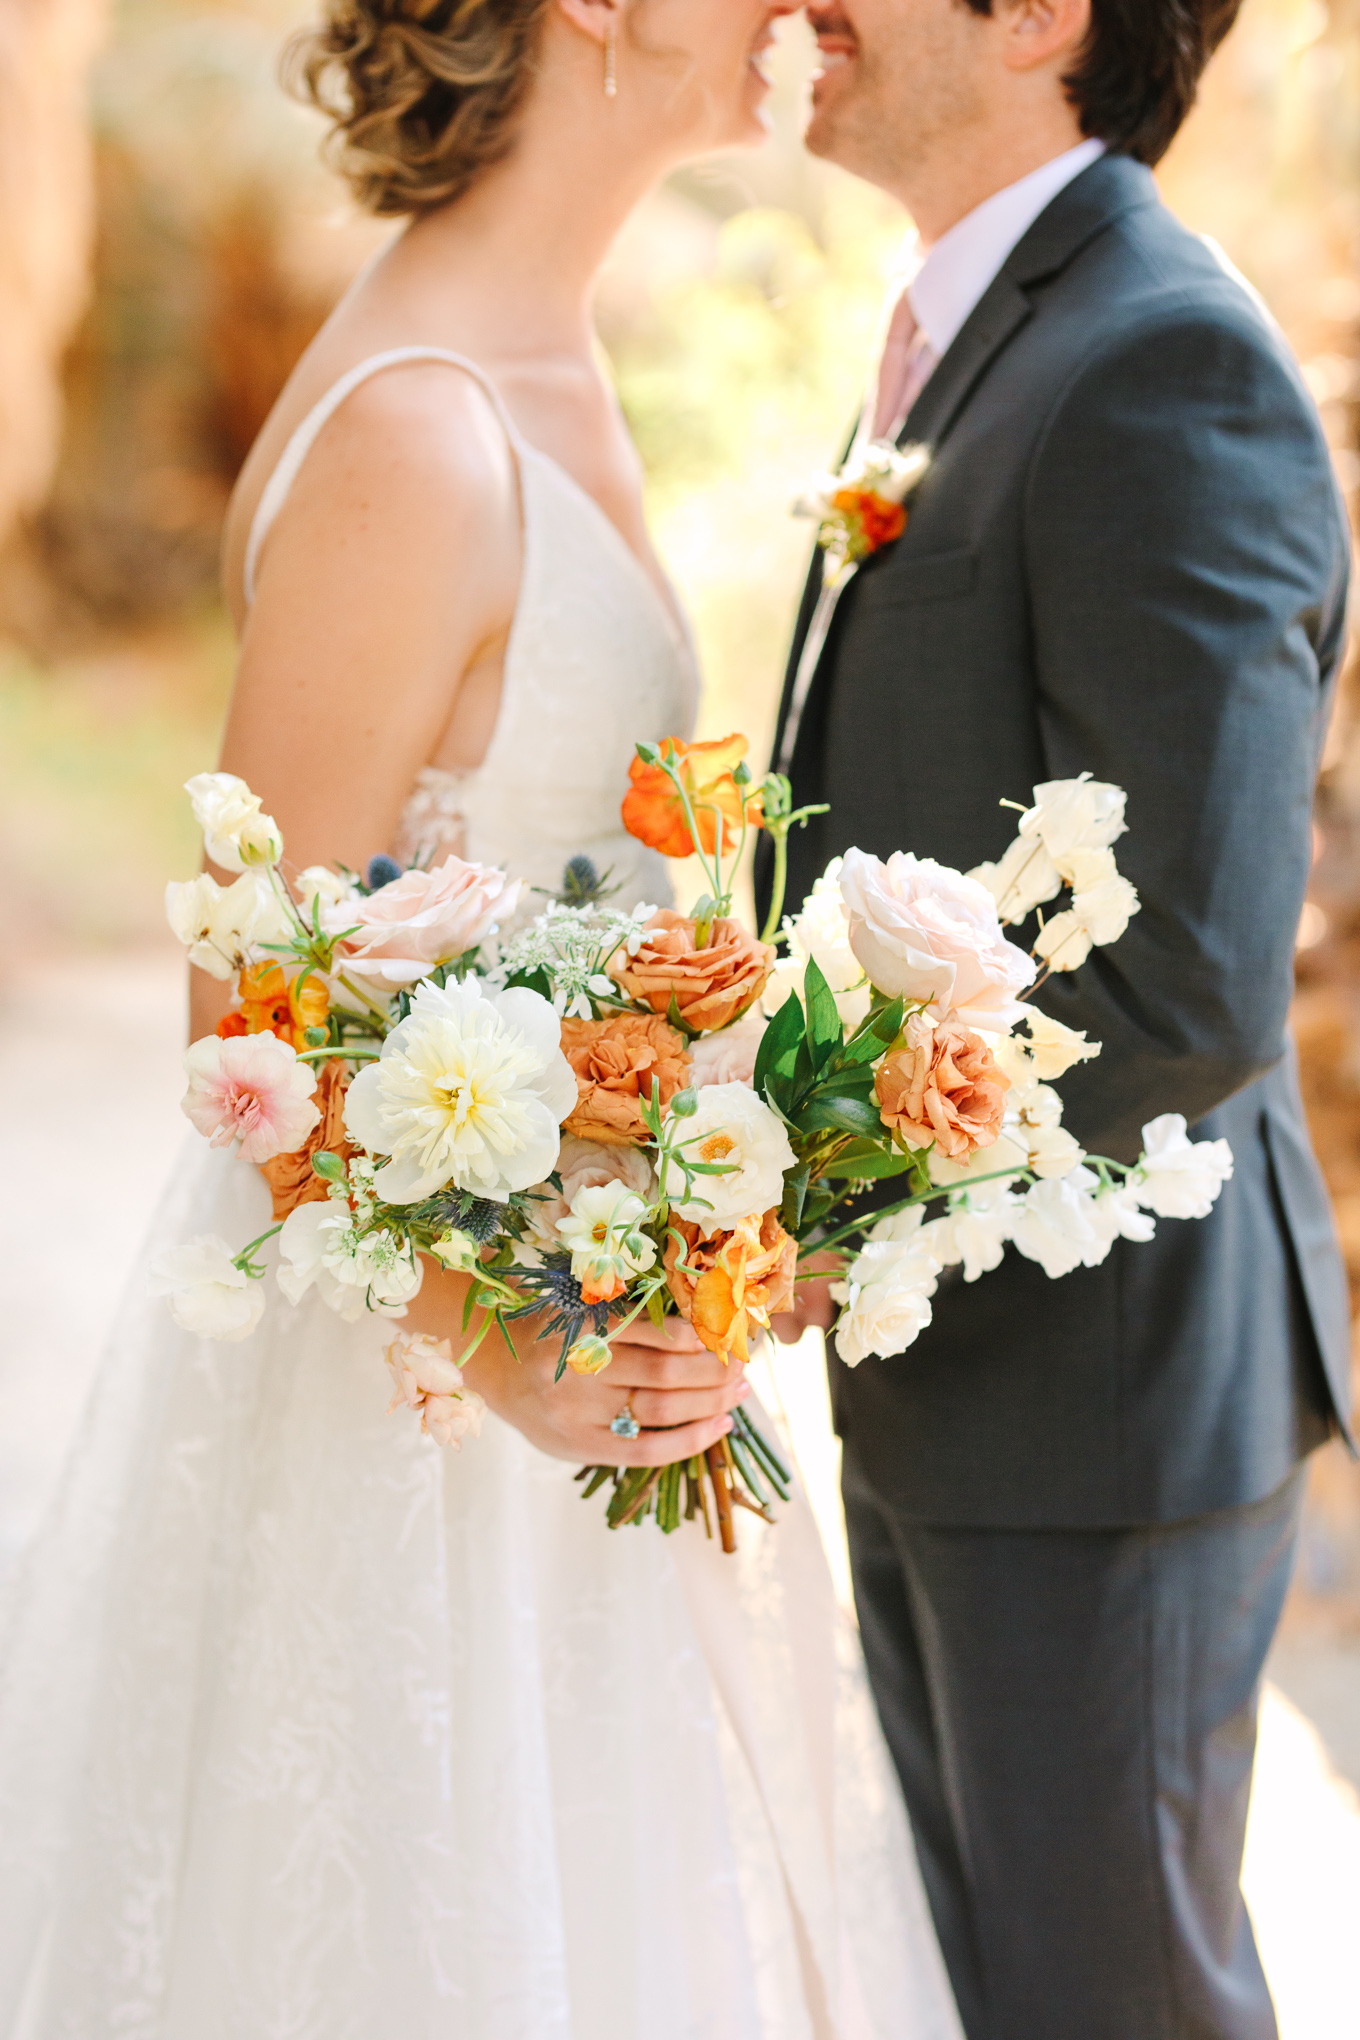 Organic neutral bouquet with orange pops of color | Beautiful bridal bouquet inspiration and advice | Colorful and elevated wedding photography for fun-loving couples in Southern California | #weddingflowers #weddingbouquet #bridebouquet #bouquetideas #uniquebouquet   Source: Mary Costa Photography | Los Angeles